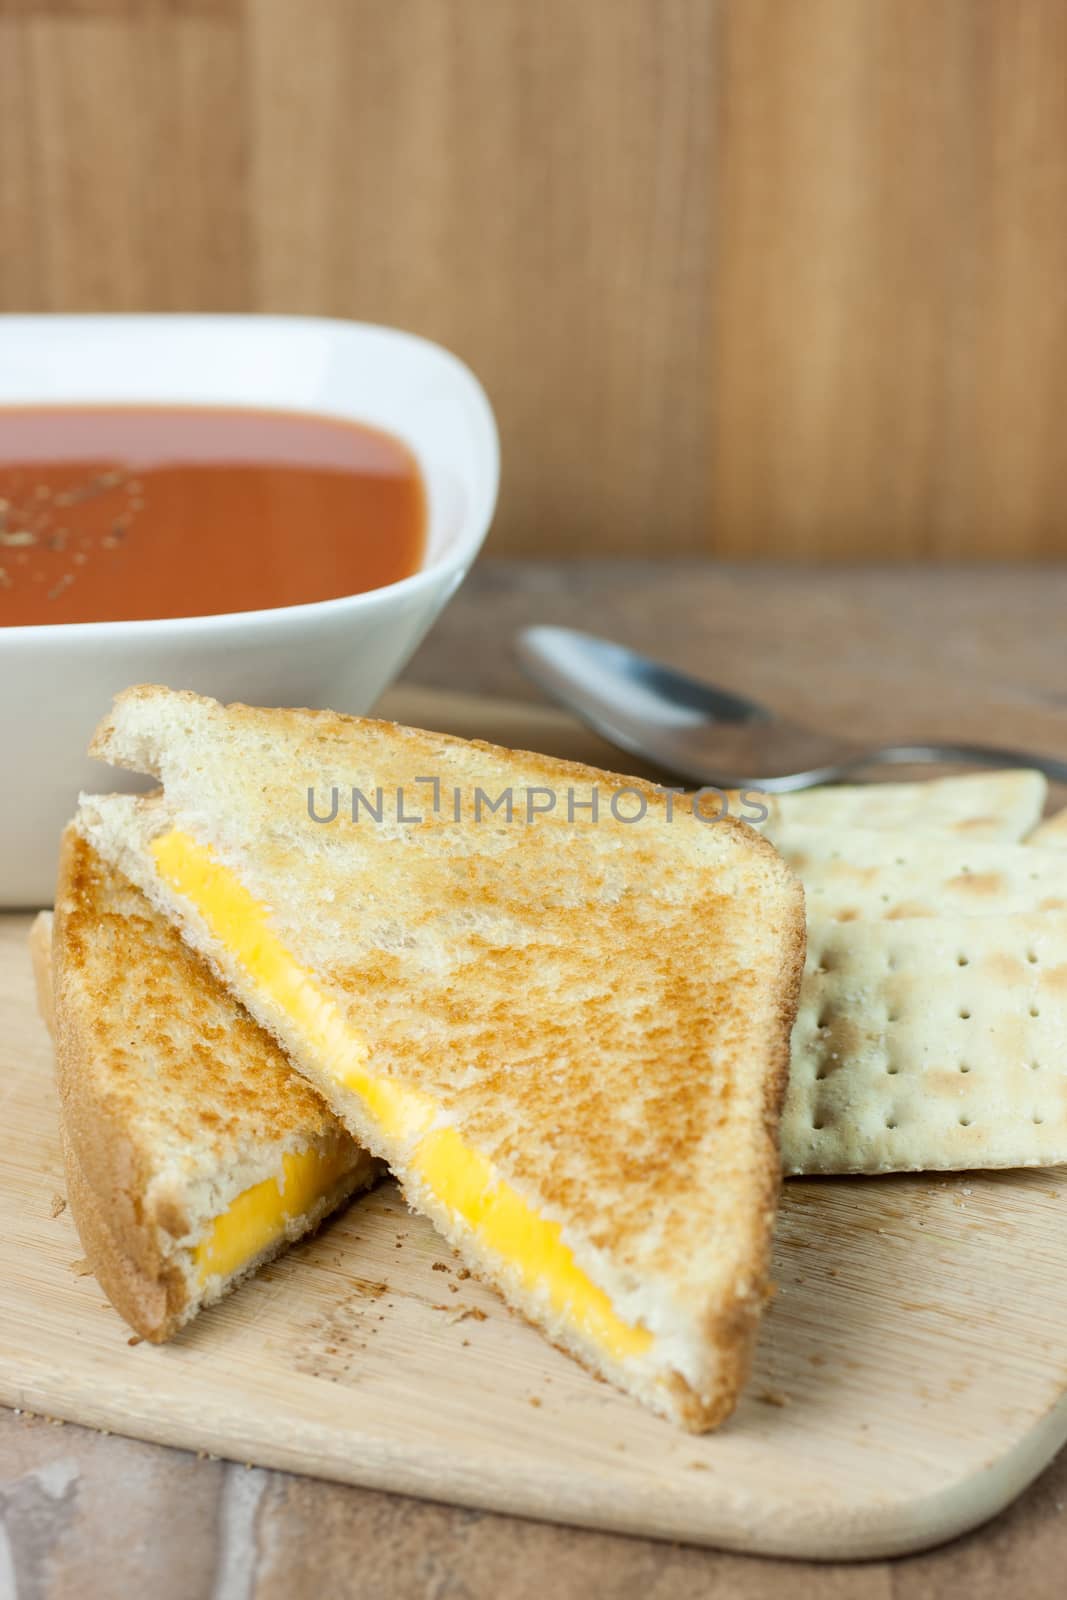 A grilled cheese sandwich with a bowl of tomato soup and saltine crackers on a wooden serving board.